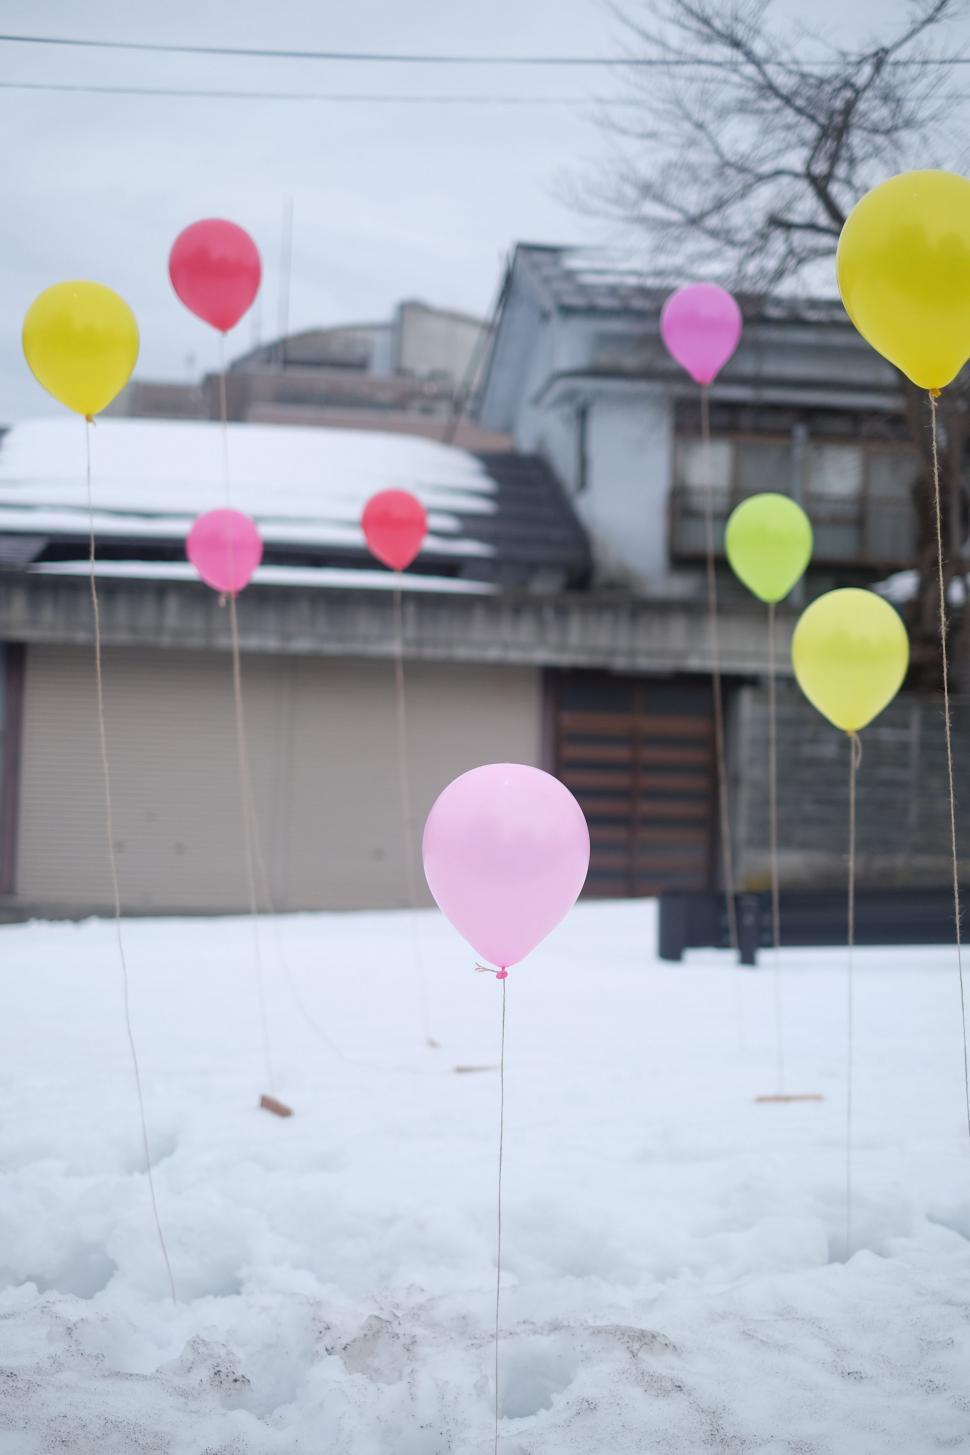 Free Image of Colorful Balloons in Snow 